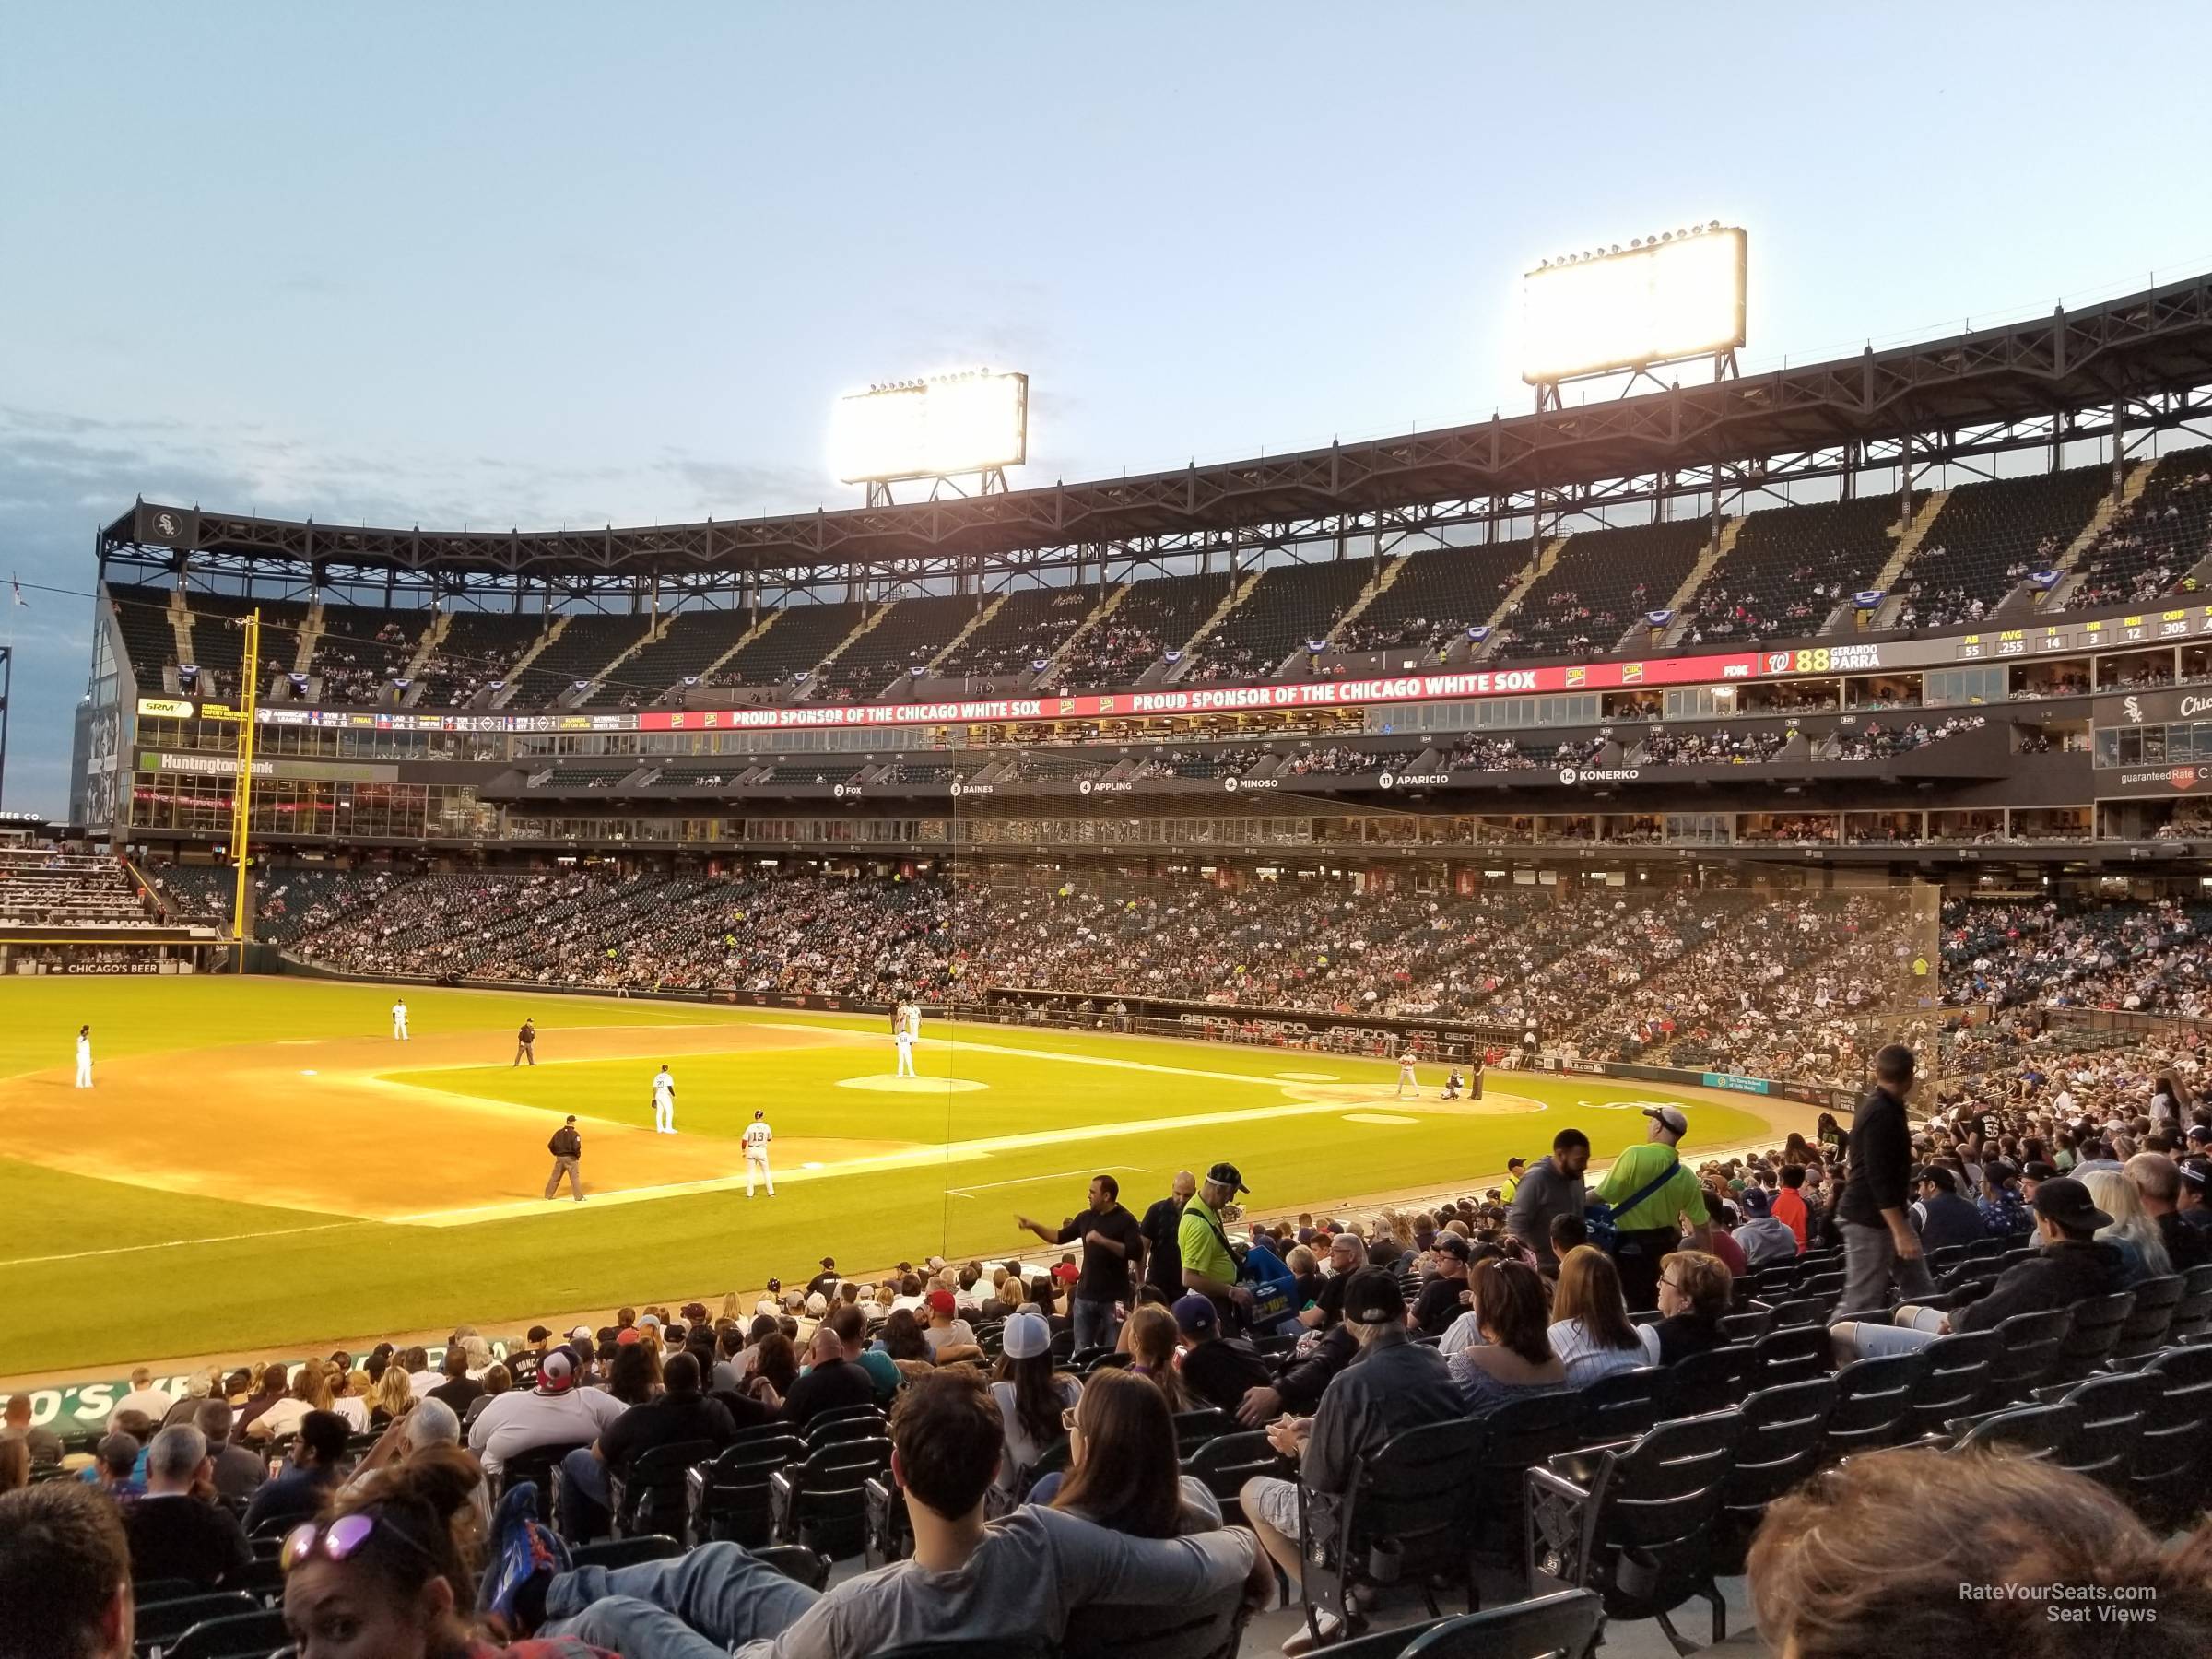 section 145, row 27 seat view  - guaranteed rate field